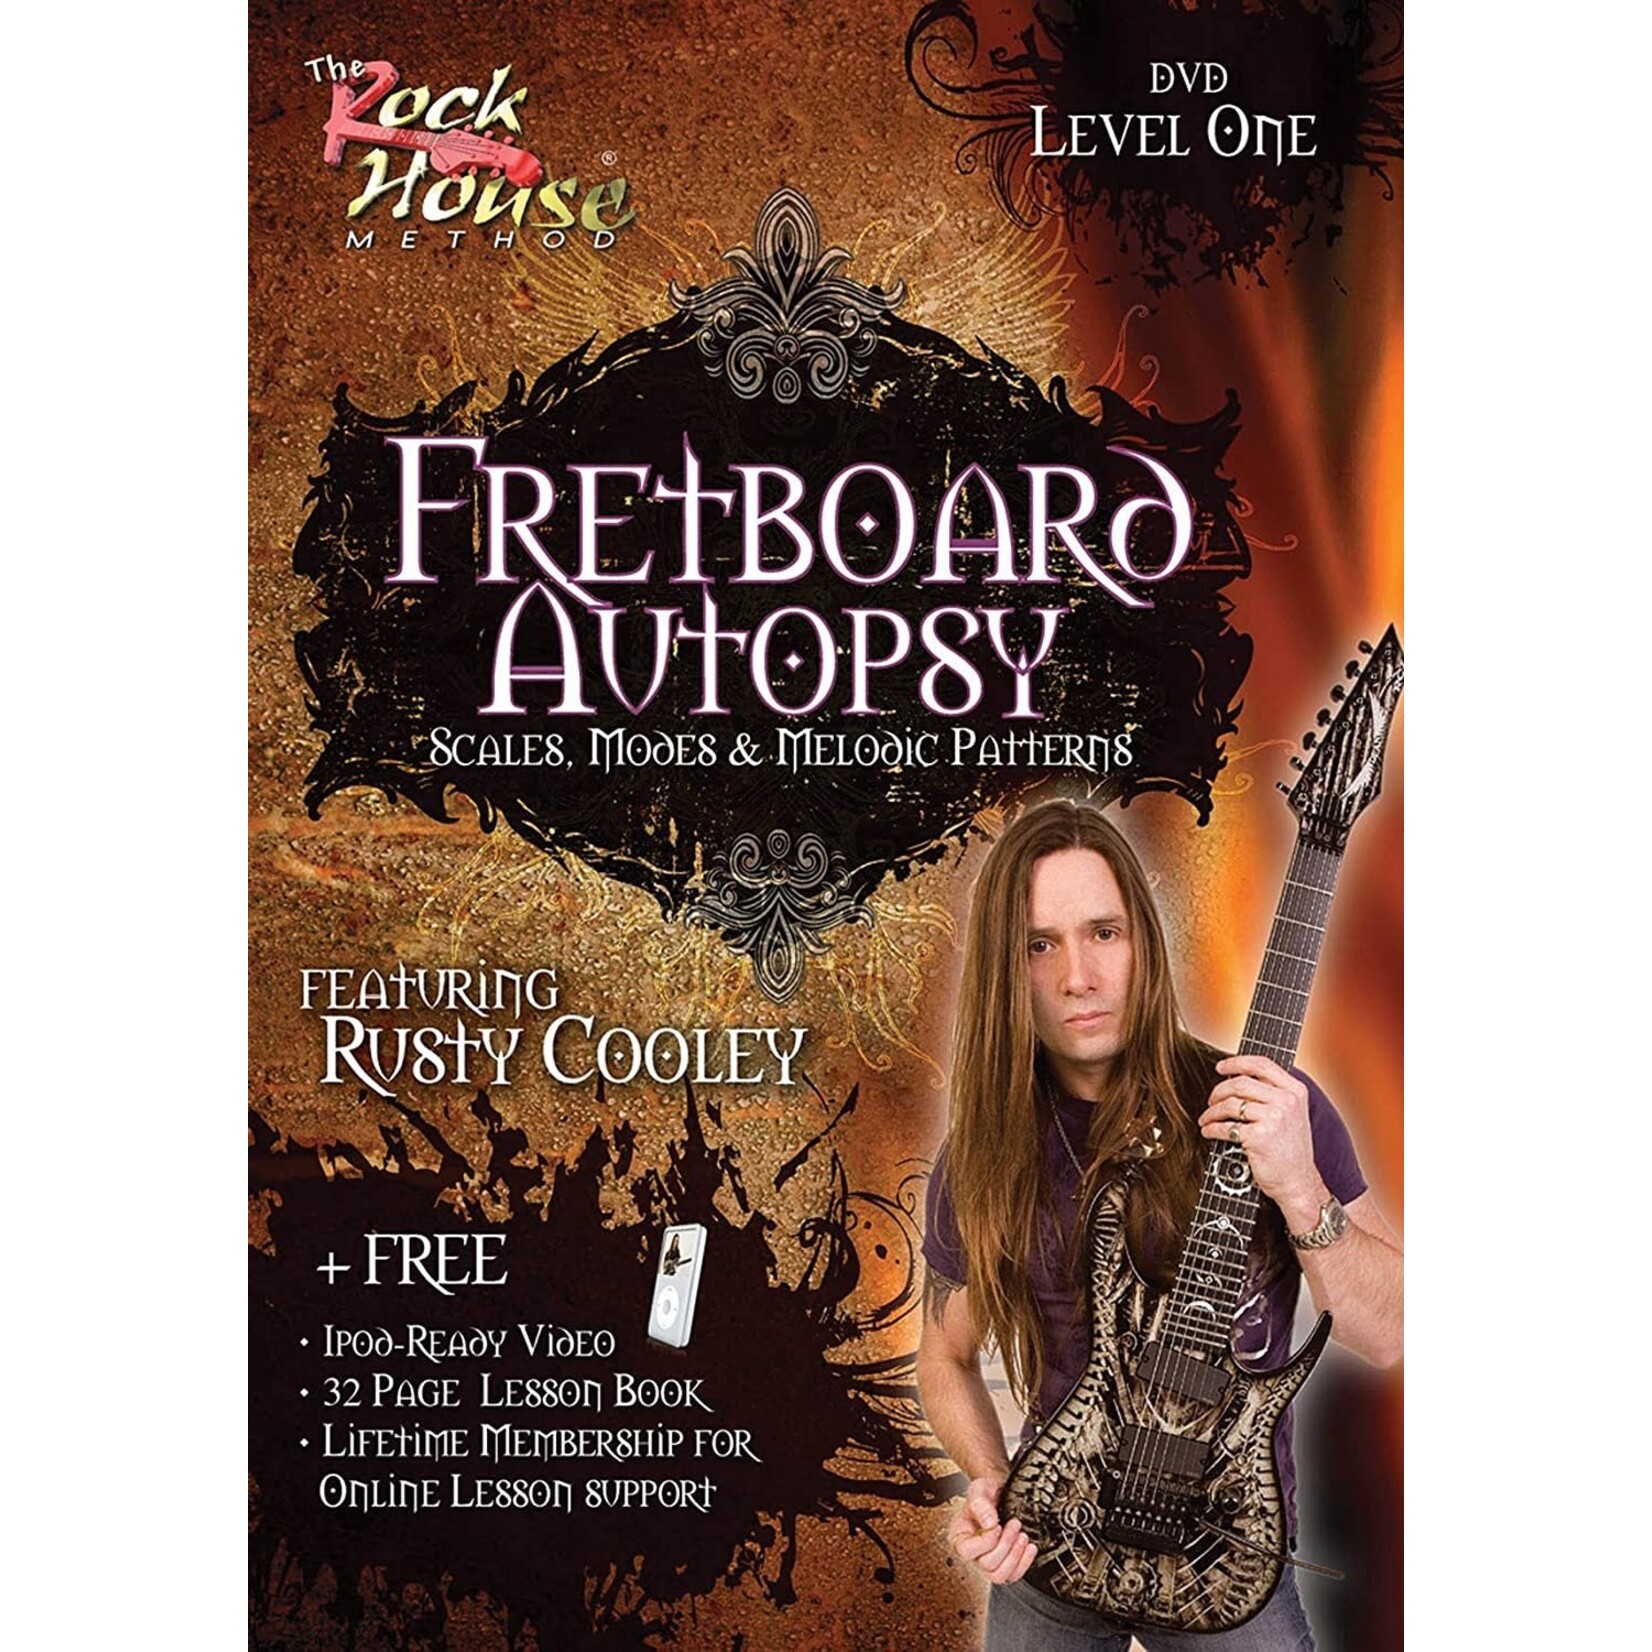 Rustey Cooley's Fretboard Autopsy - Scales, Modes, & Melodic Patterns DVD